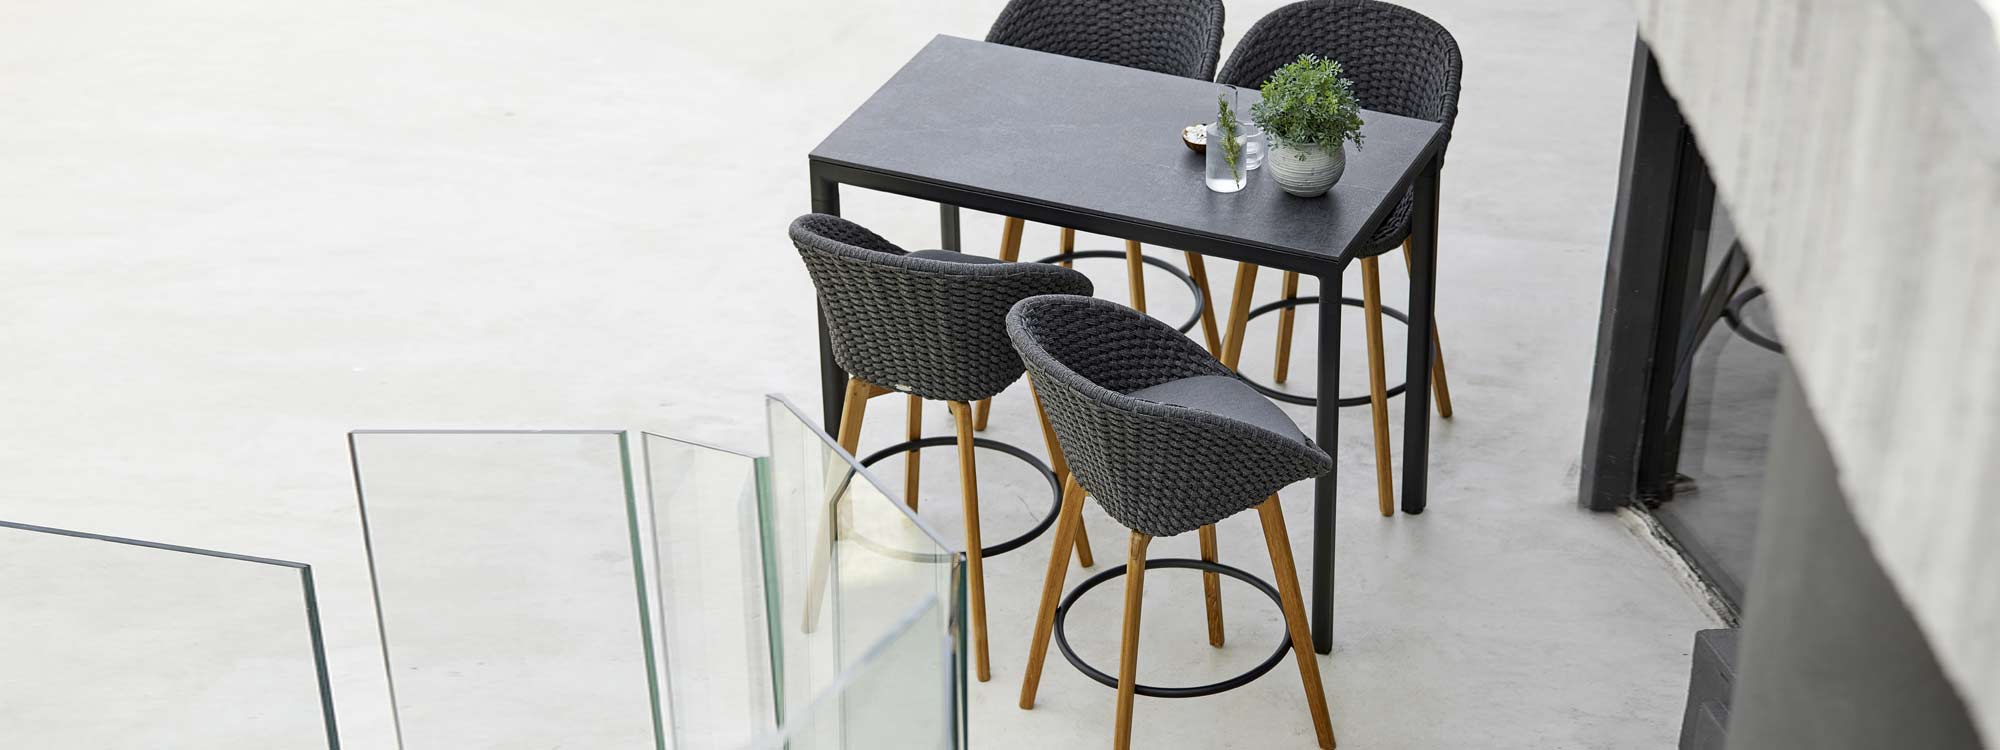 Image of 4 Cane-line Peacock bar stools in dark grey SoftRope with teak legs, shown around Drop high bar table with black Fossil ceramic table top